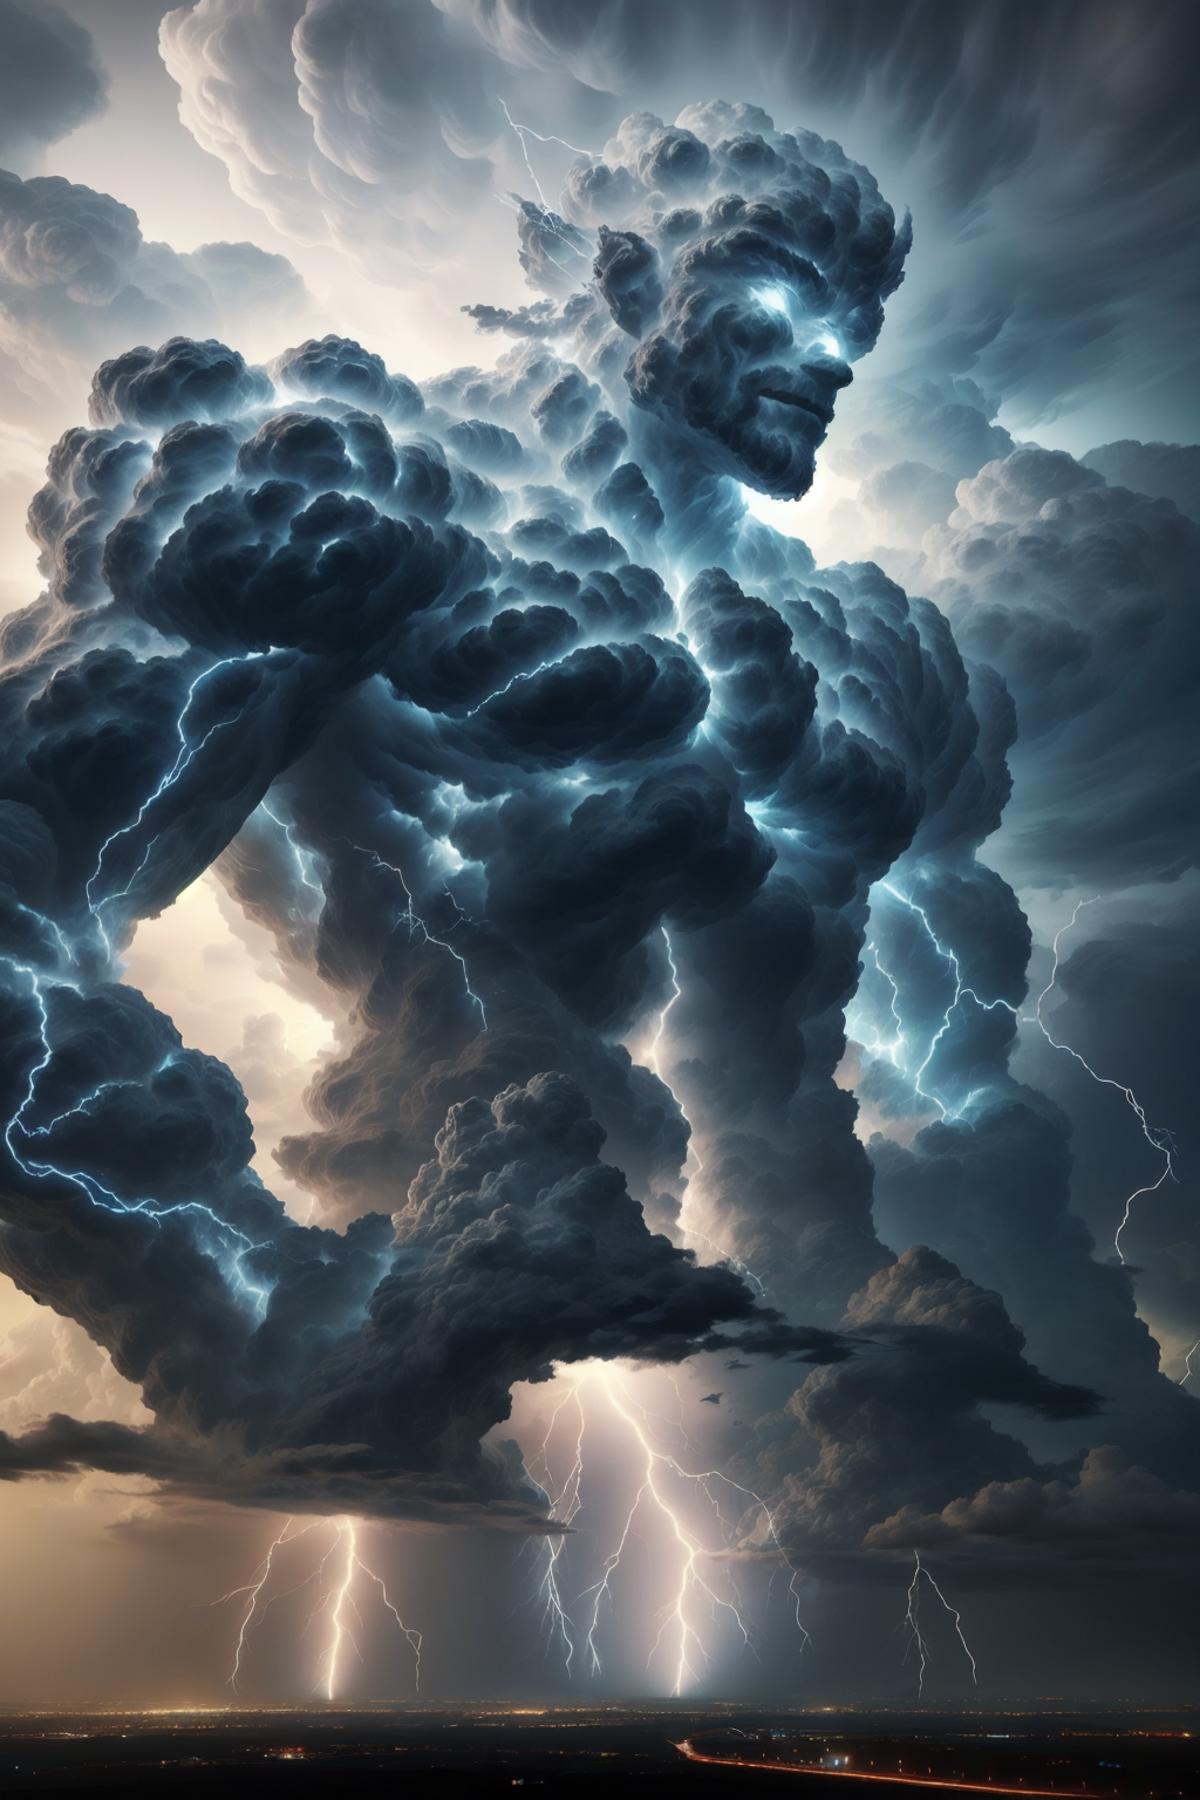 An illustrated image of a lightning bolt superhero with a beard and mustache, standing in the sky among dark clouds, ready to strike.